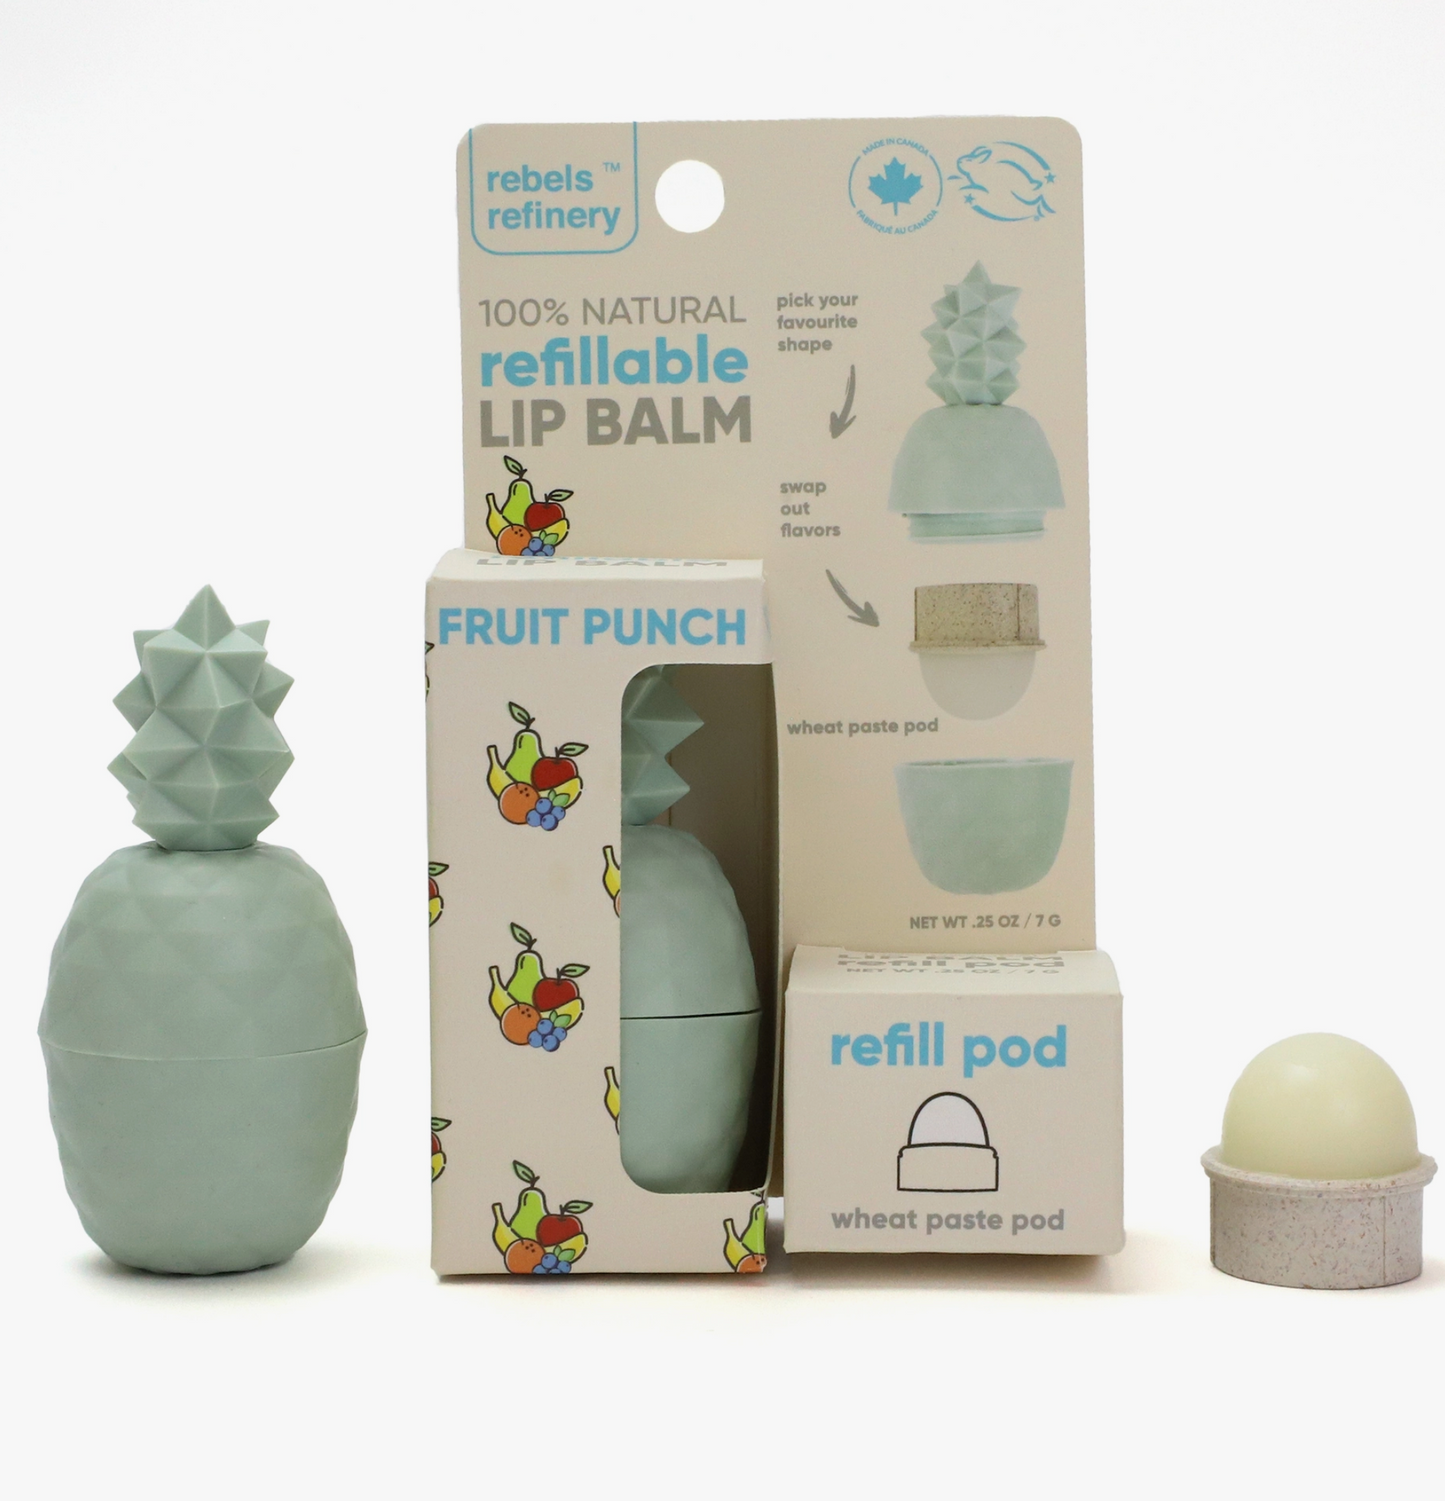 Refillable Lip Balm and Pod - 100% Natural Fruit Punch